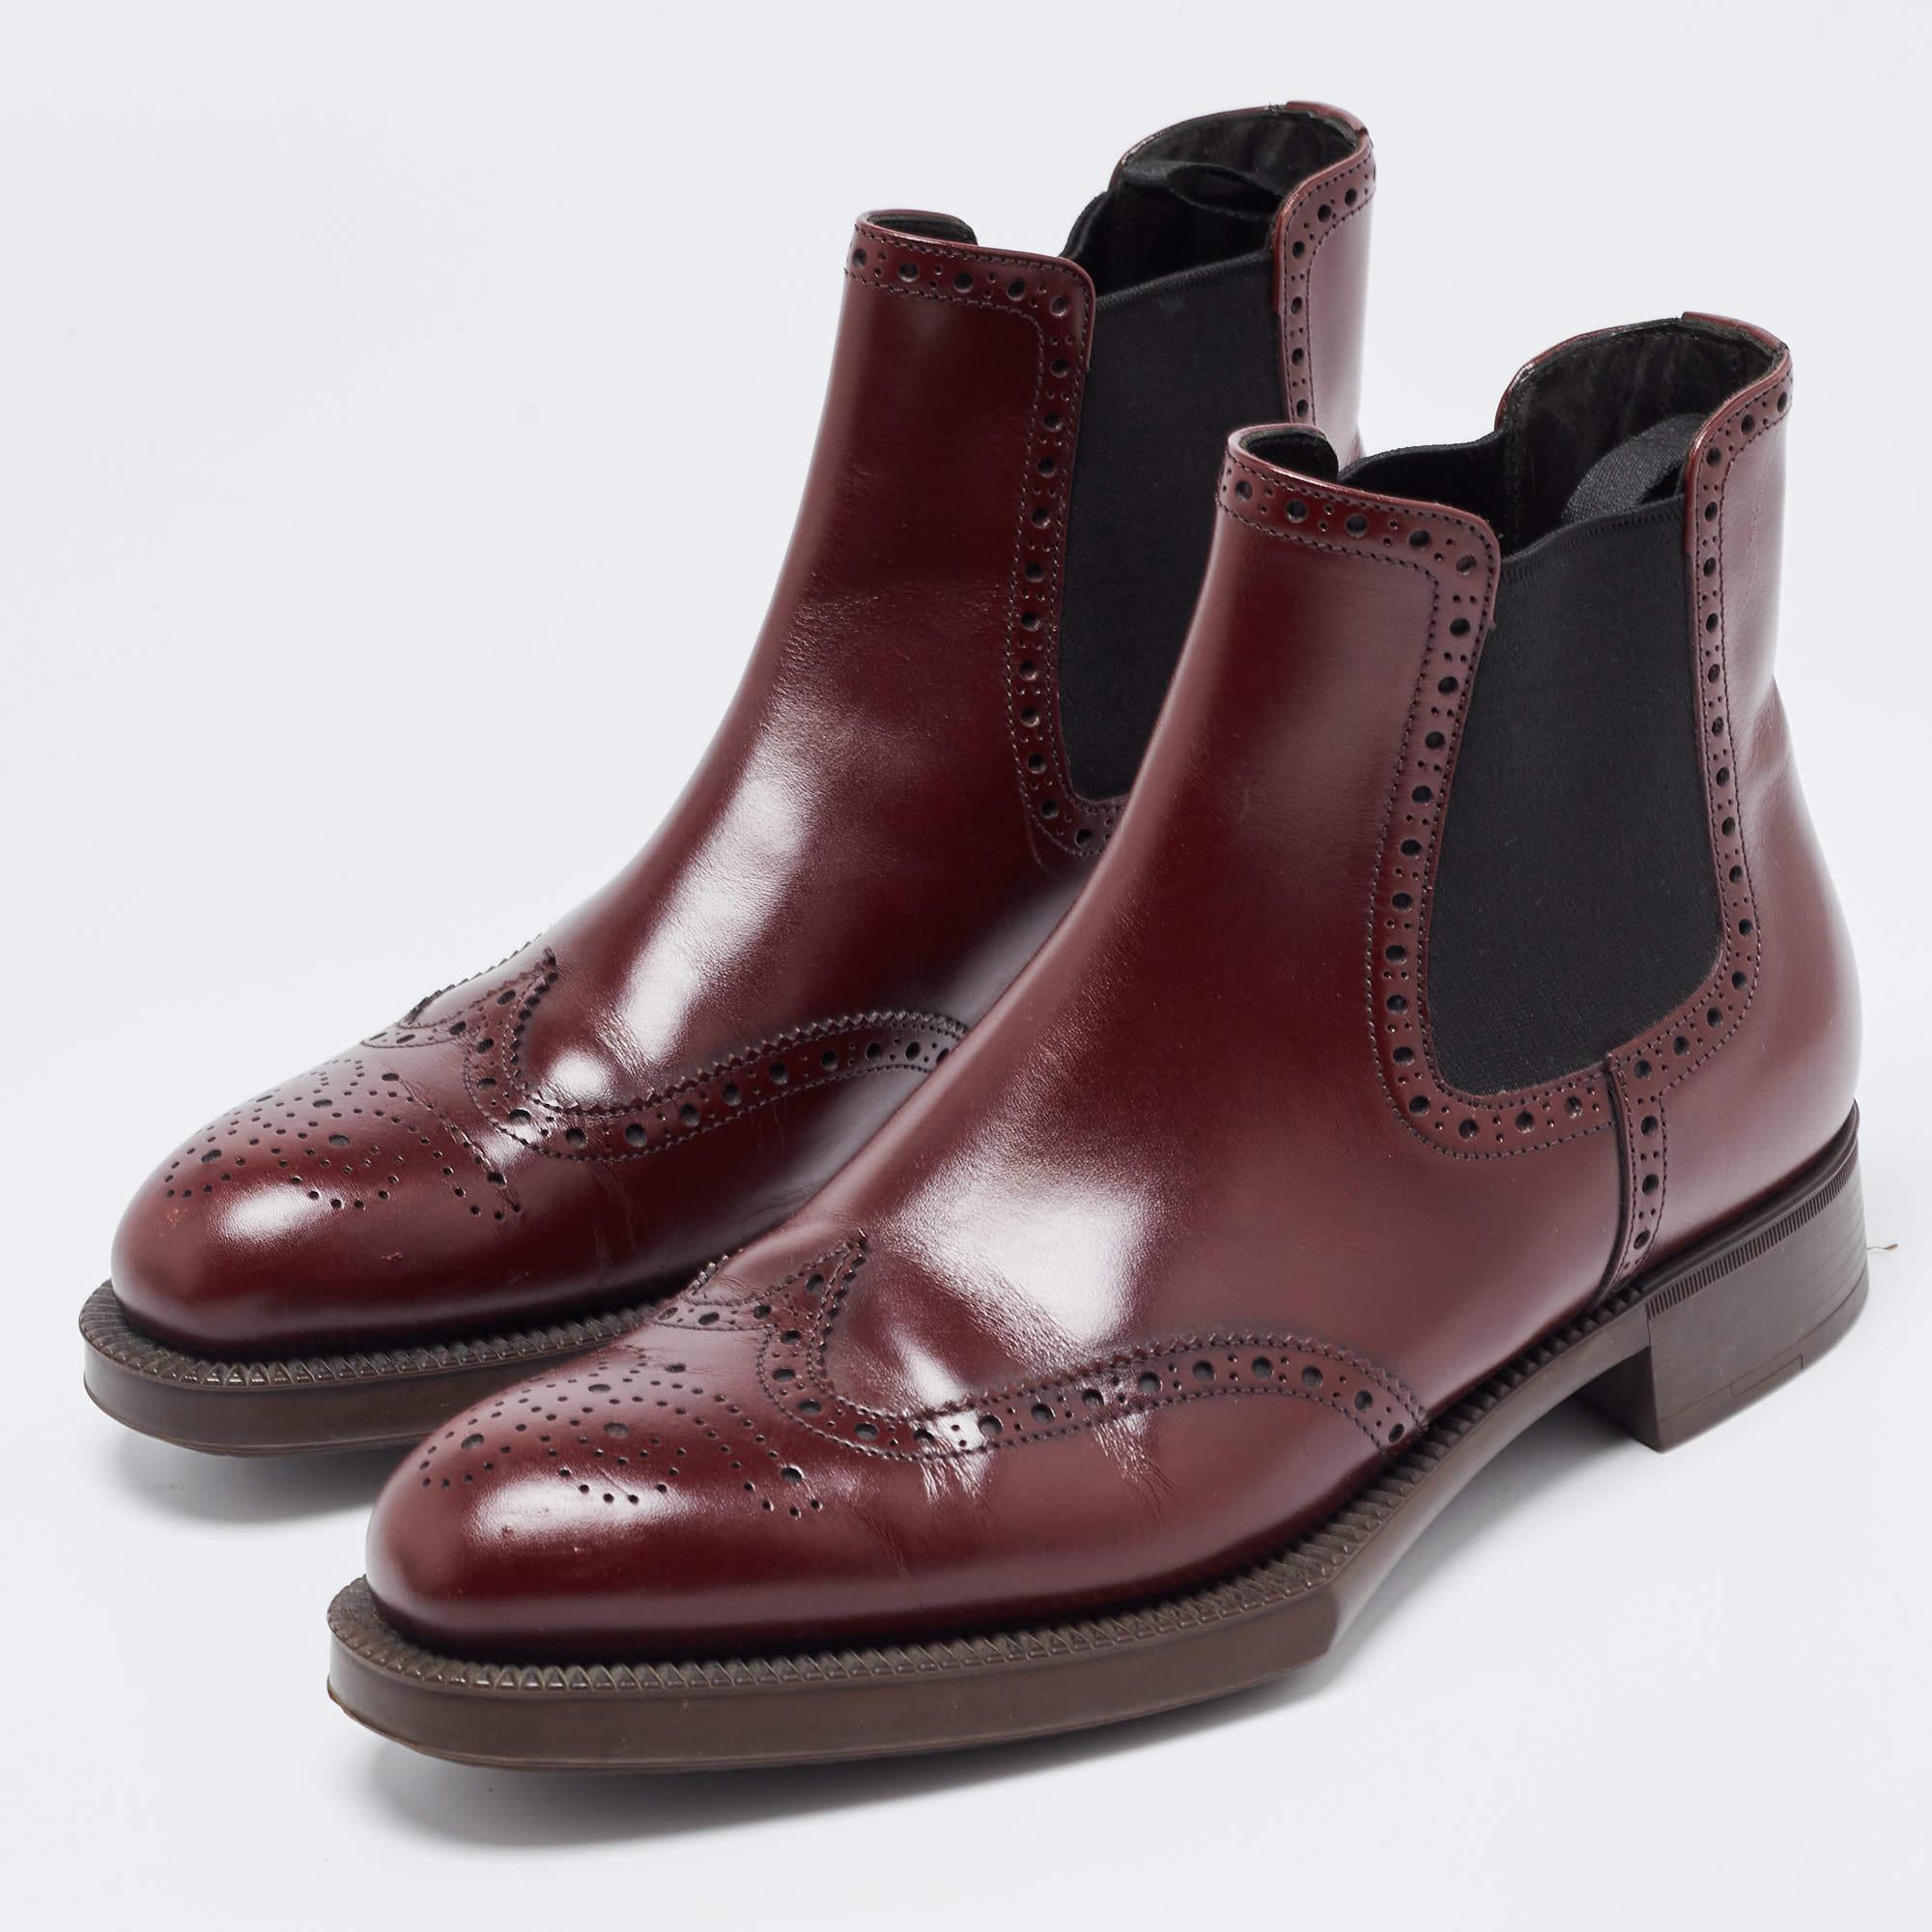 Women's Prada Burgundy Leather Brogue Ankle Boots Size 38.5